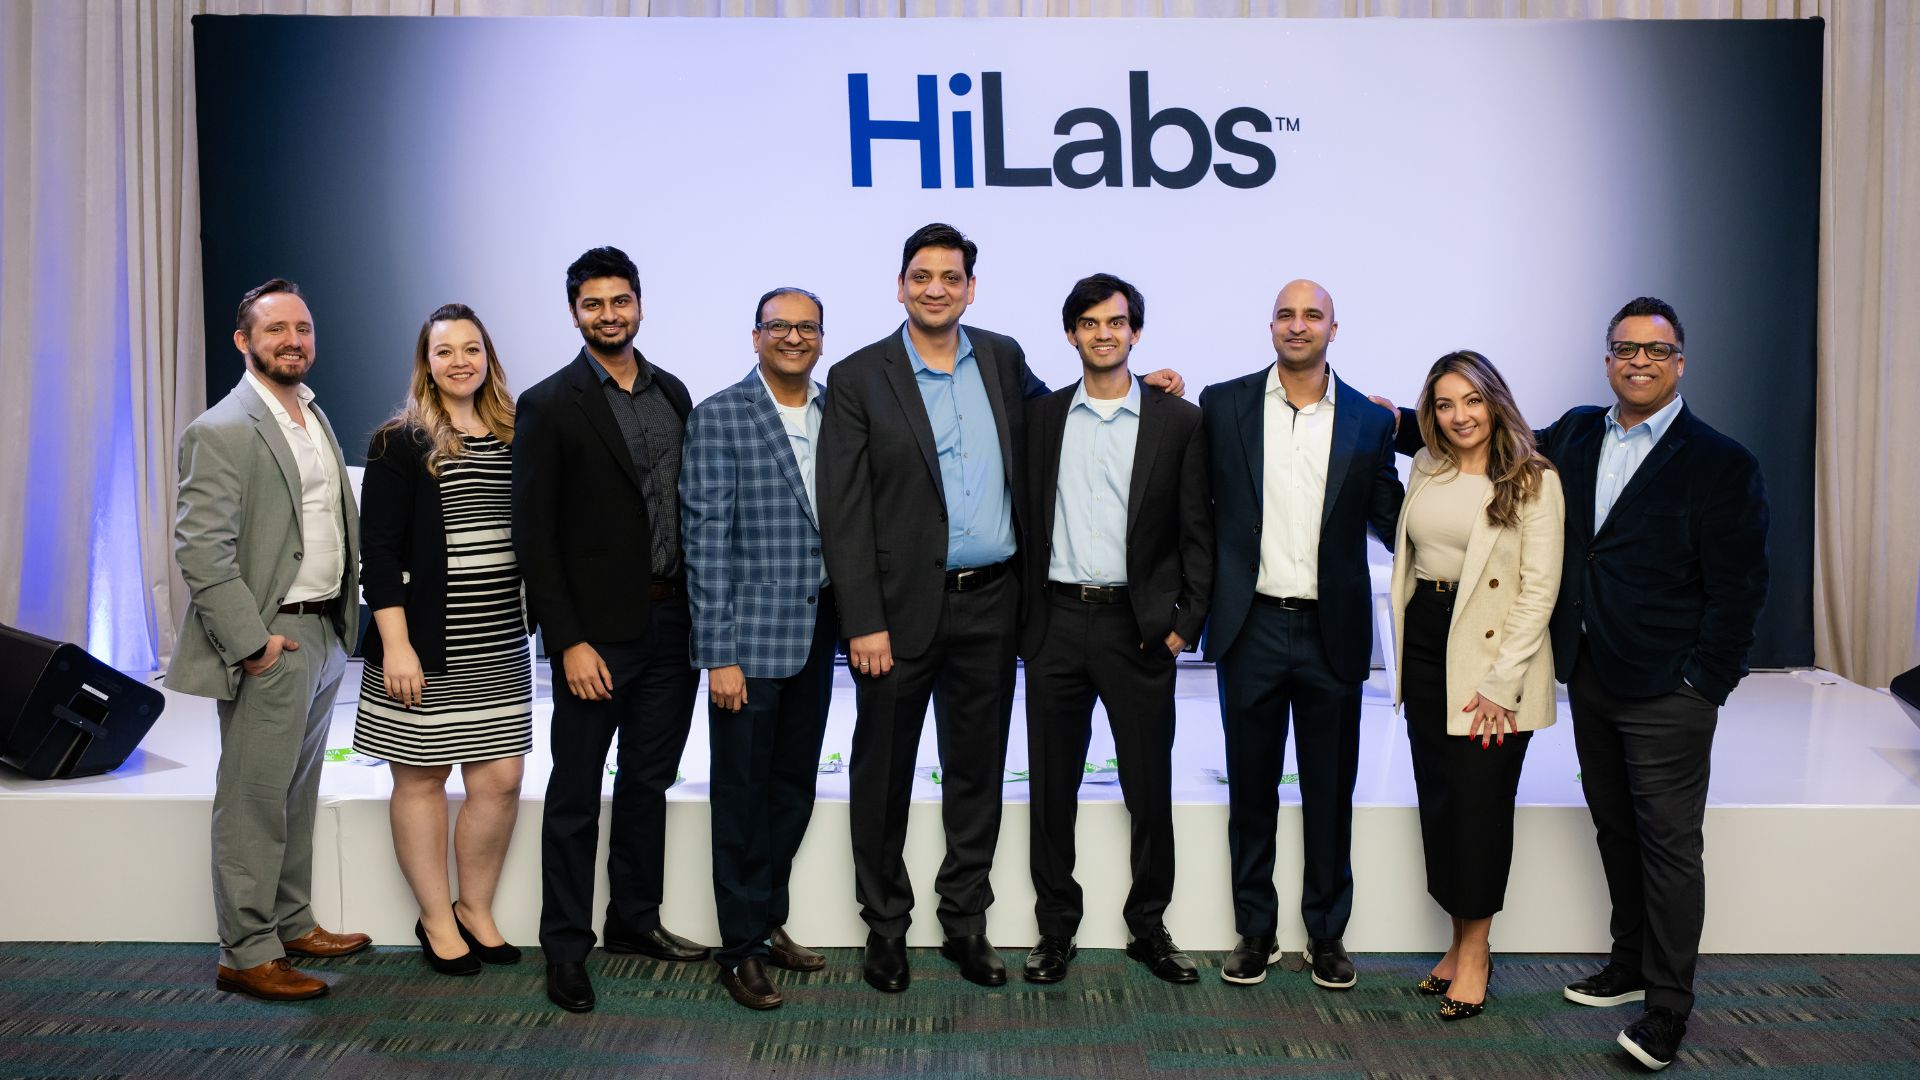 HiLabs execs smile for a photo